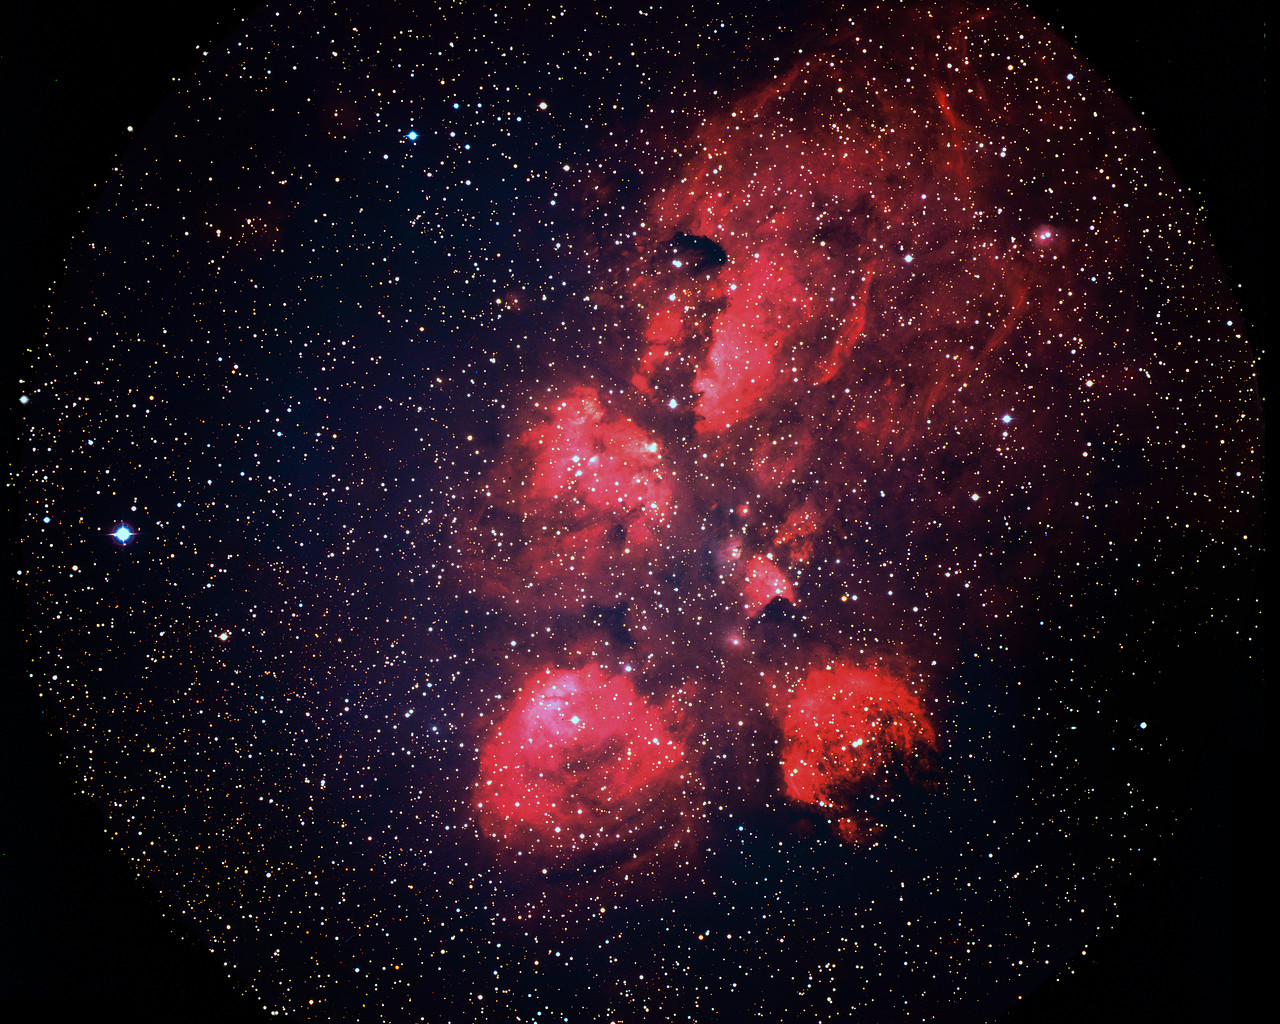 ESO - ngc6334 - Cat's Paw Print in the Scorpius Constellation